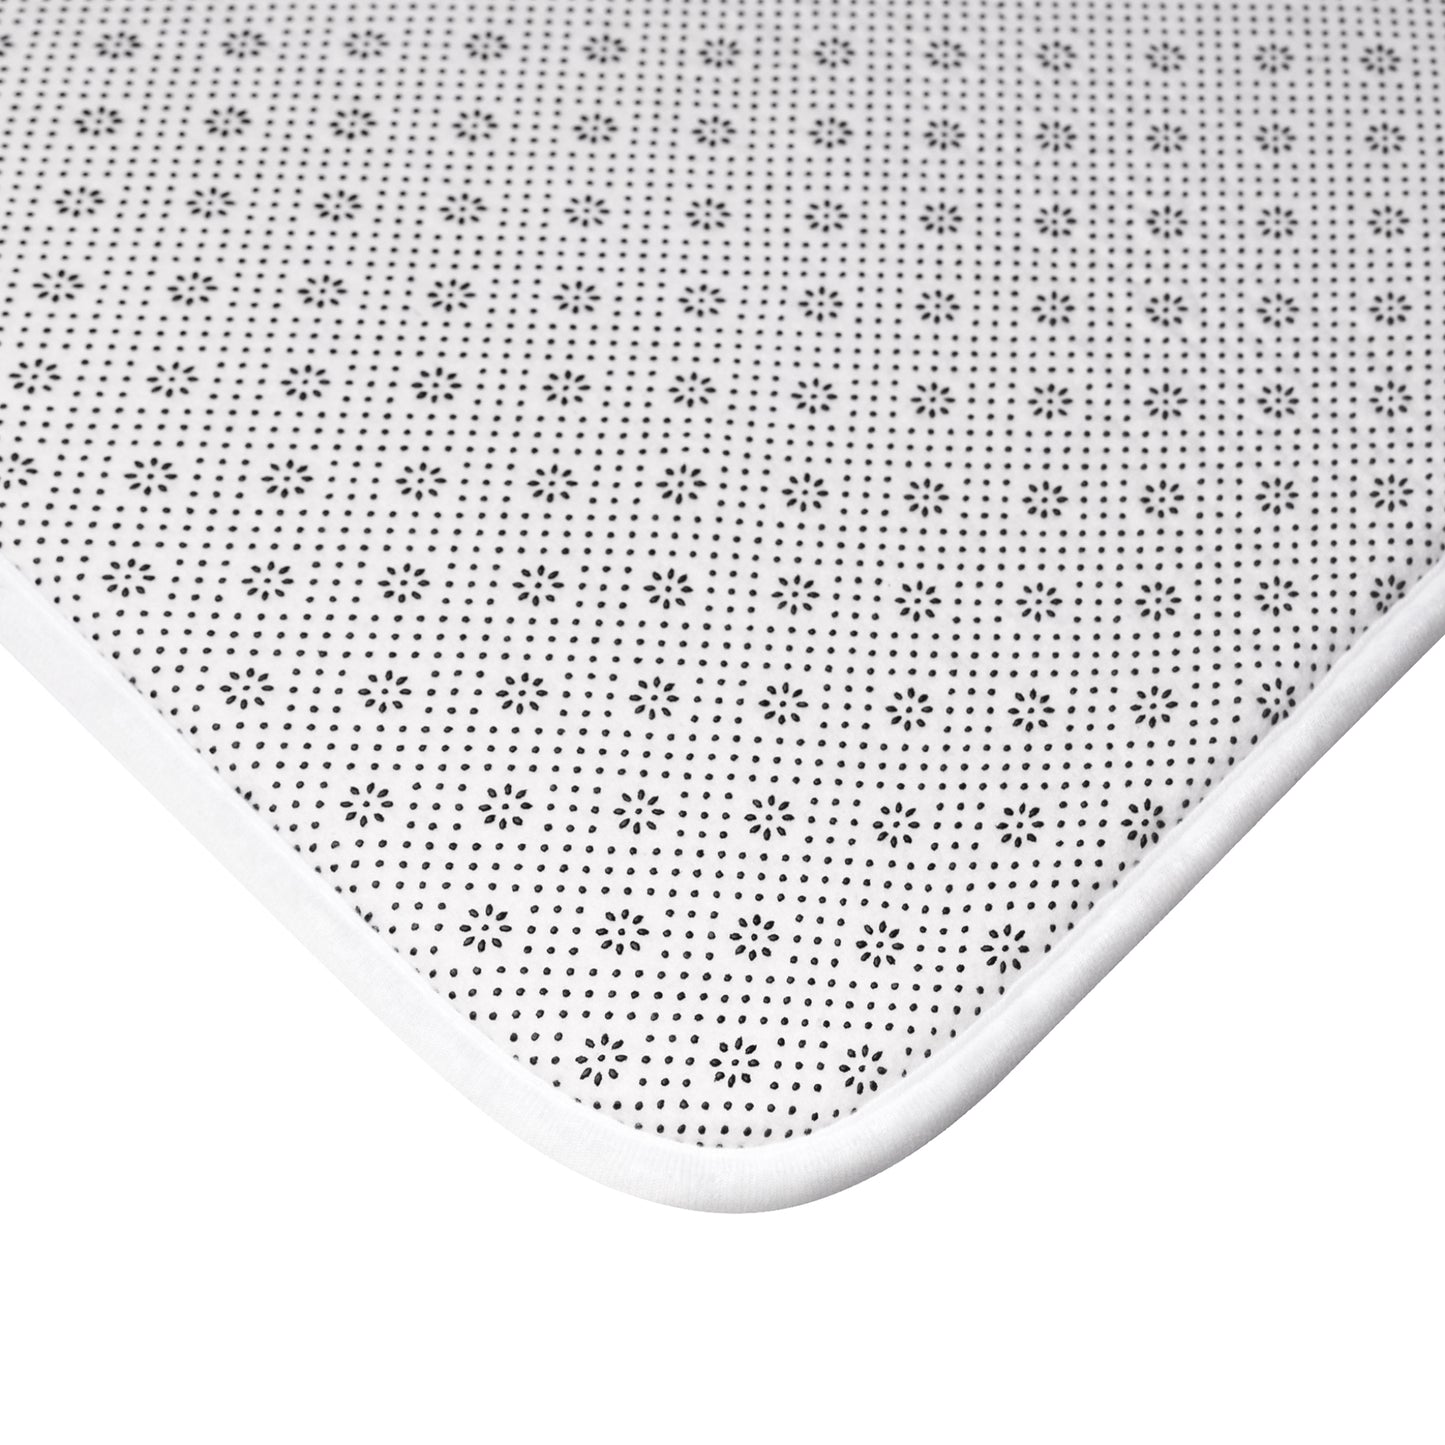 Rising to the Gods - Microfiber Bath Mat - Fry1Productions